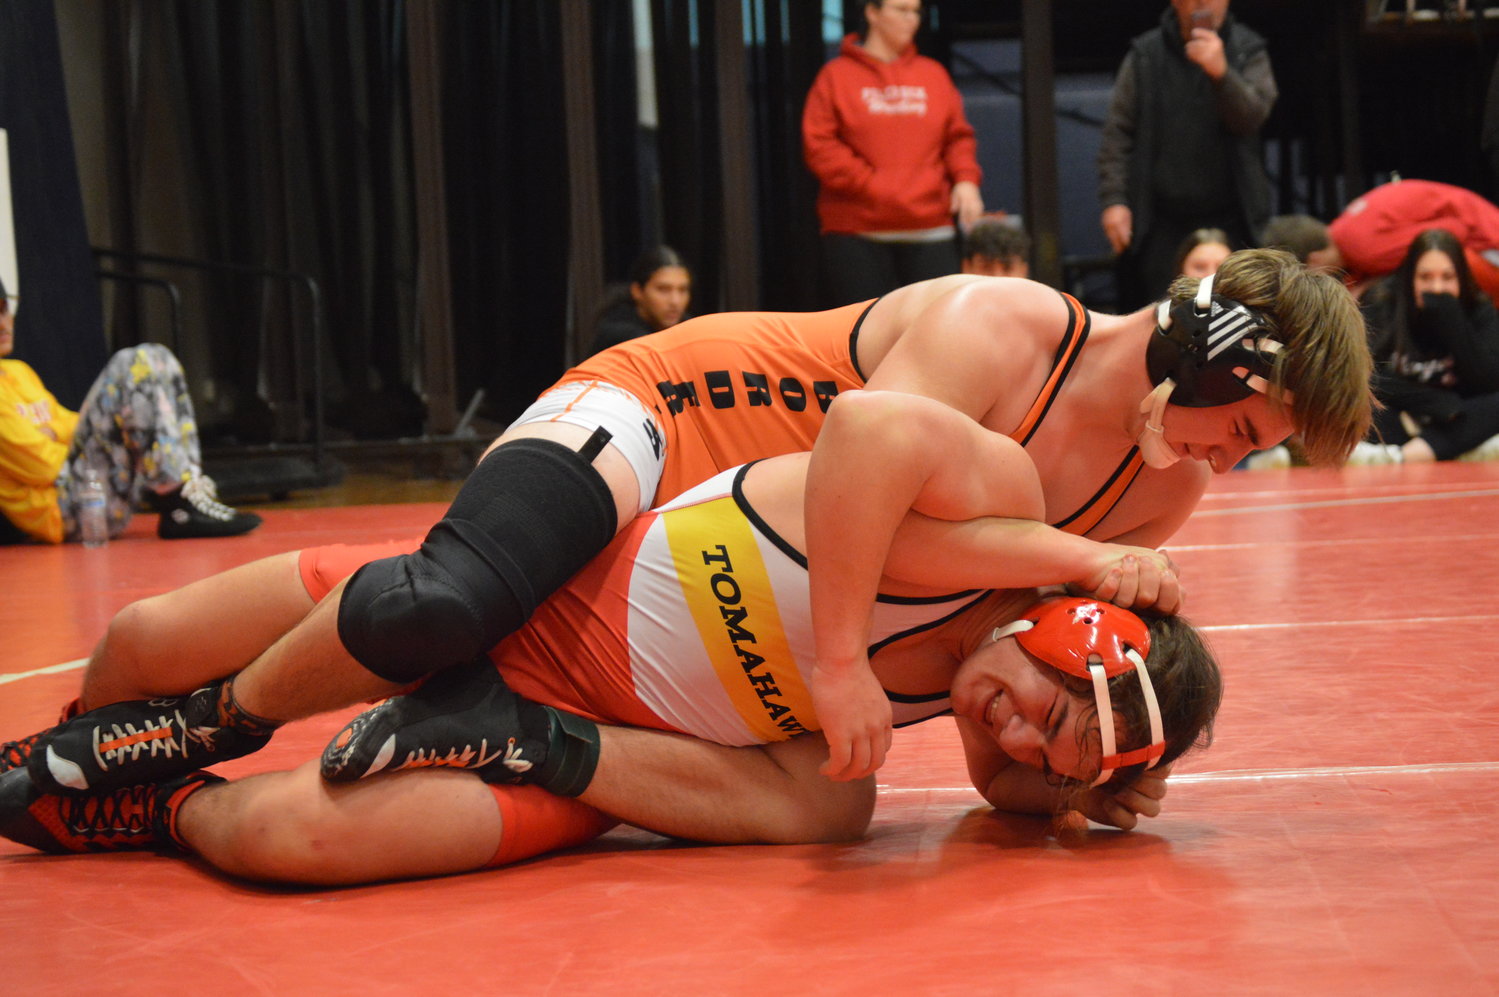 Jackson Veals on top of his opponent at the Mariner Holiday tournament December 3 in Everett.